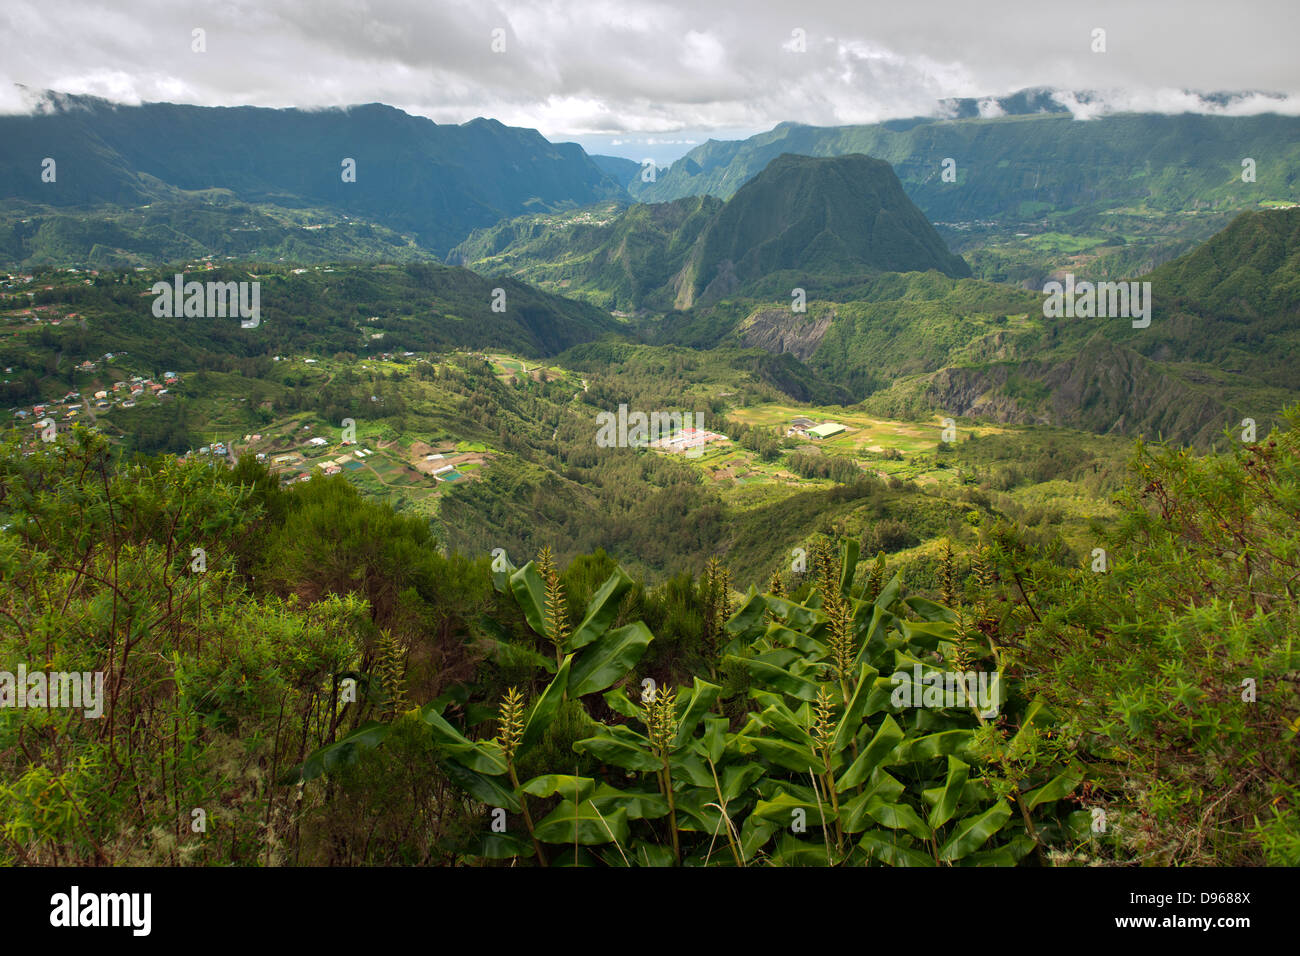 View across the Cirque de Salazie caldera on the French island of Reunion in the Indian Ocean. Stock Photo